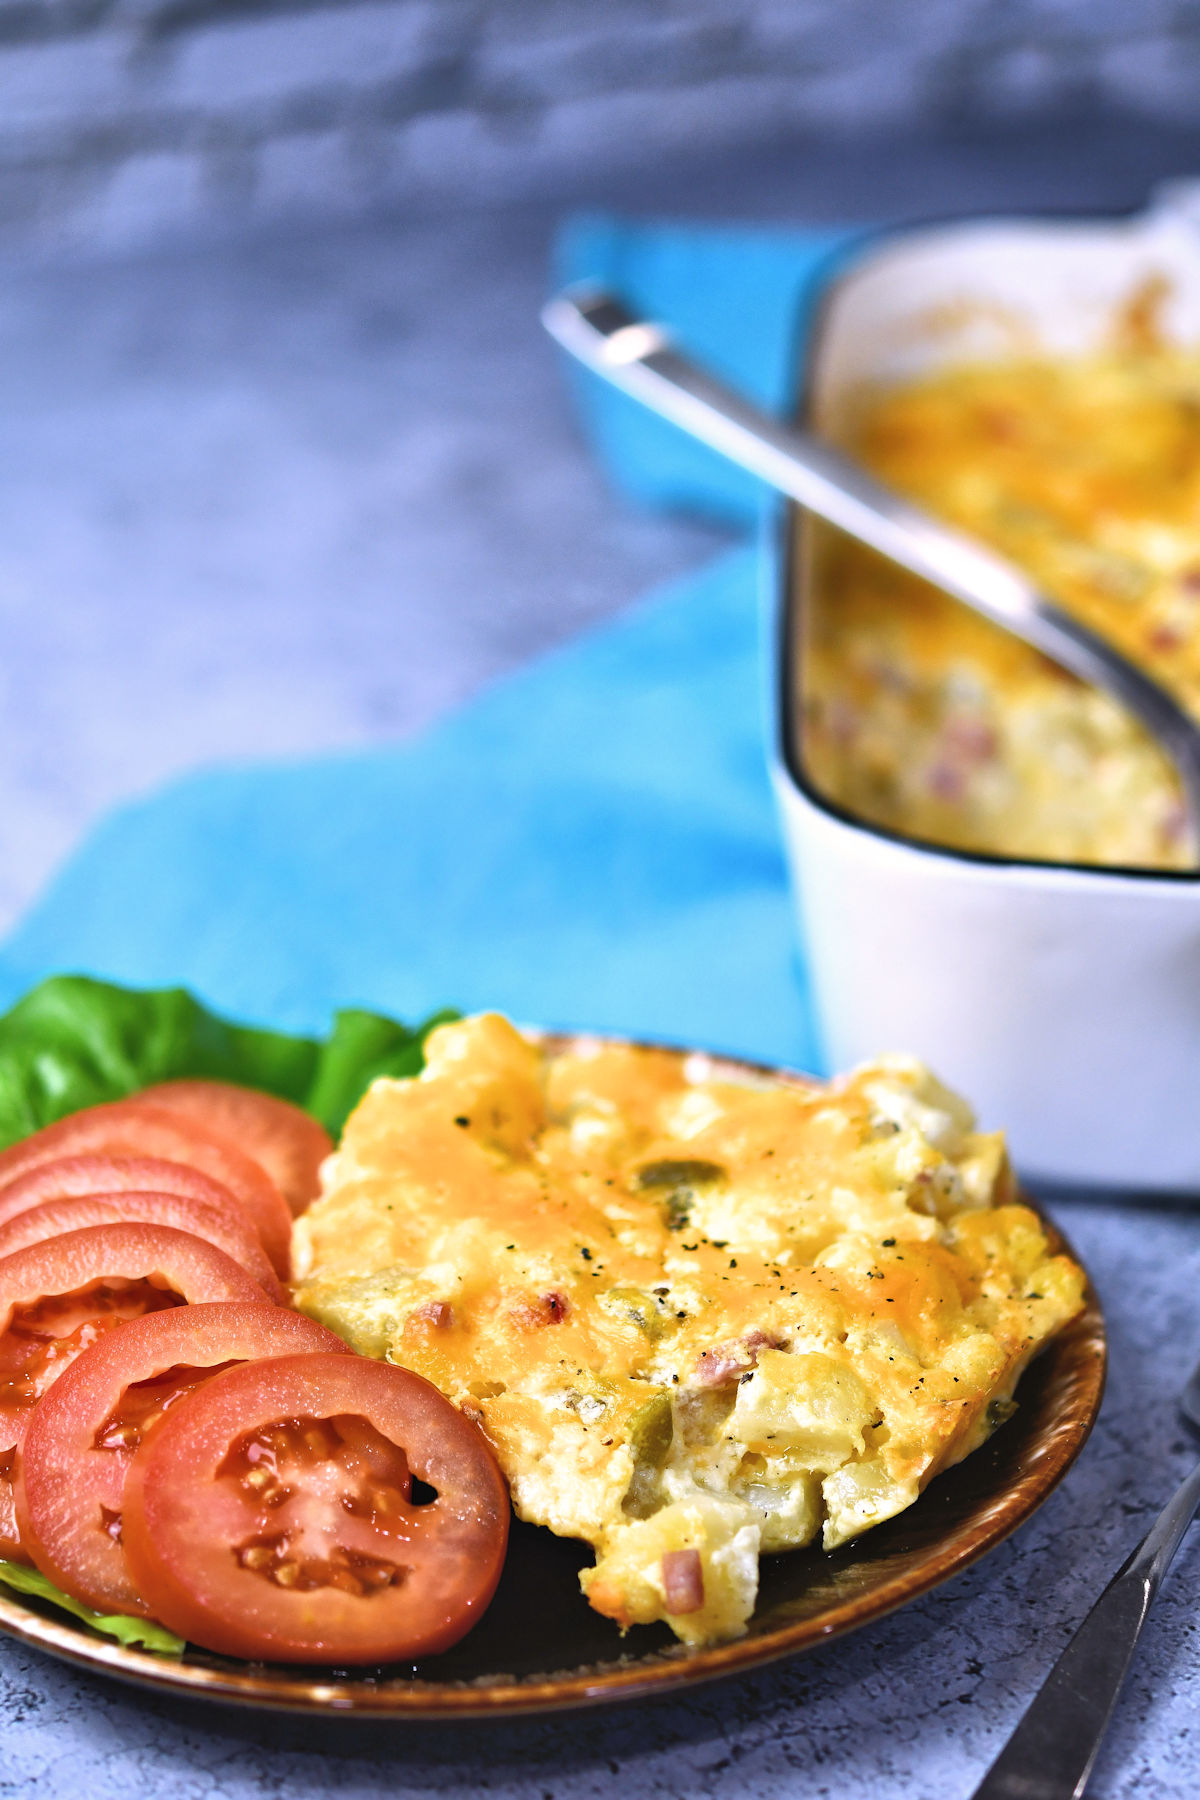 A serving of potato breakfast casserole, on a plate, served with sliced tomatoes.